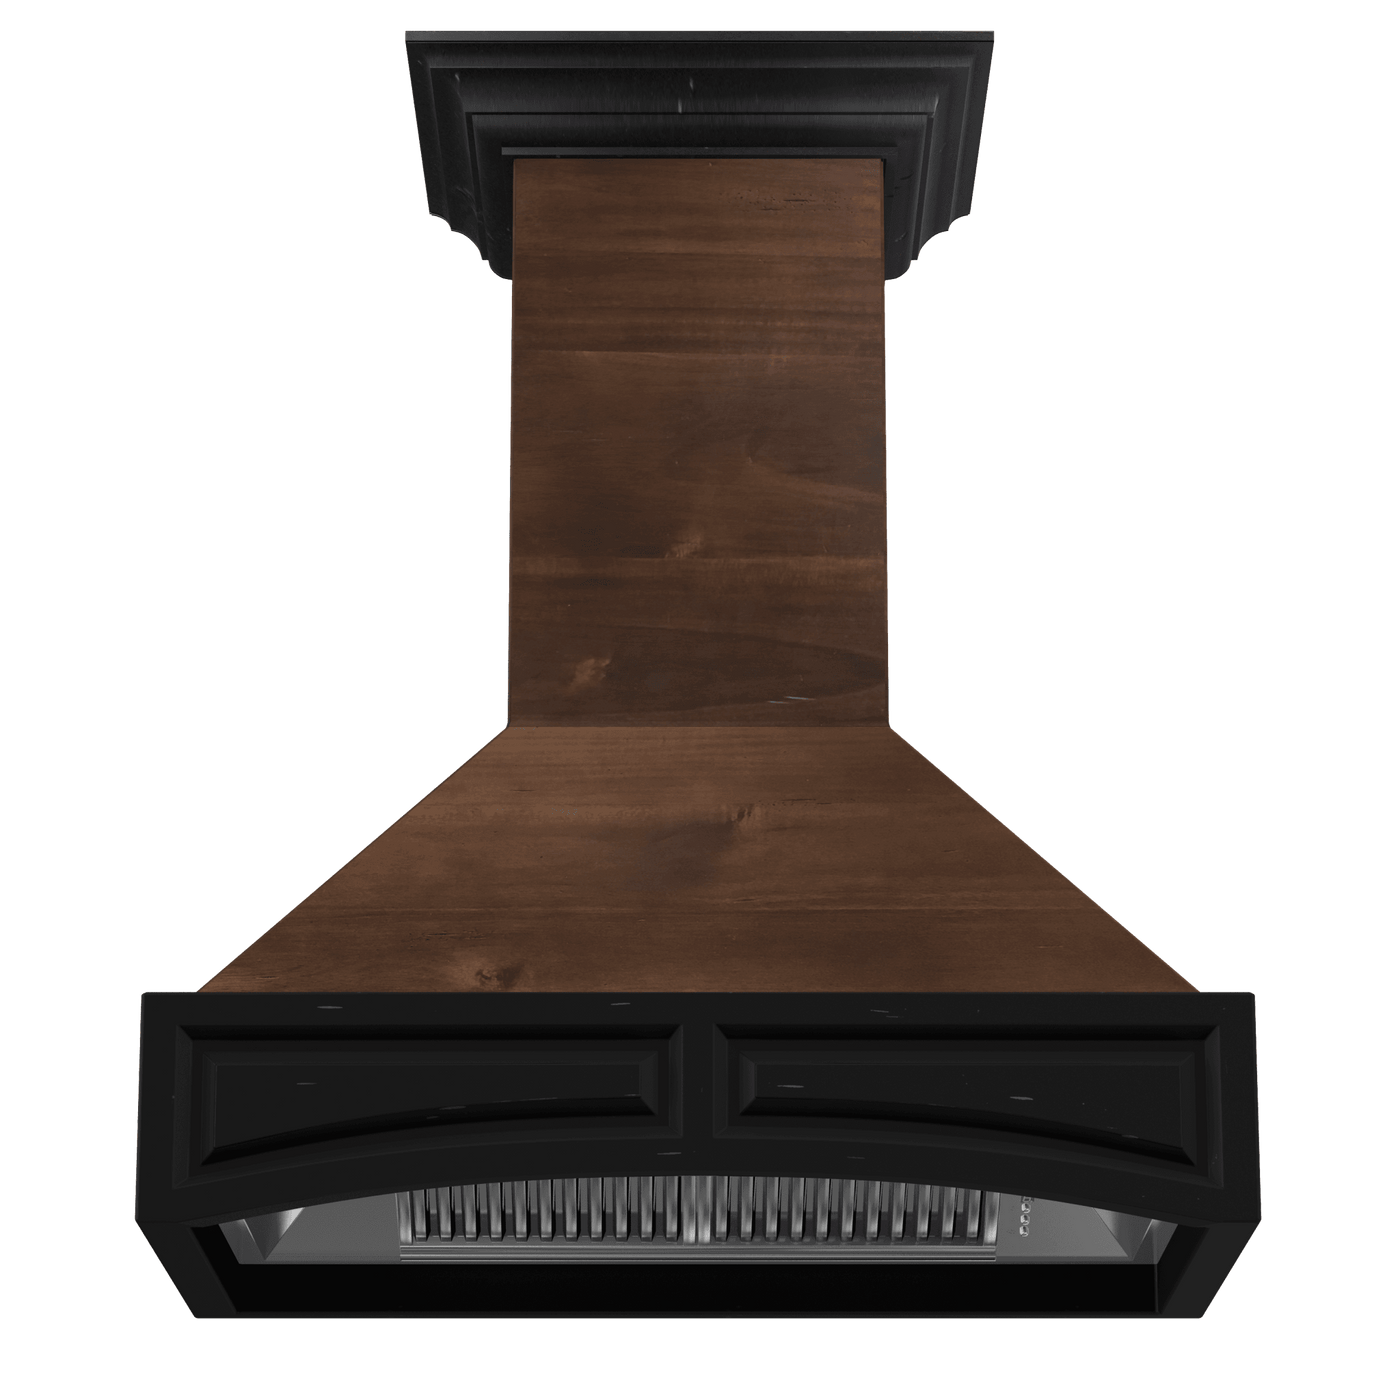 ZLINE Kitchen and Bath, ZLINE Wooden Wall Mount Range Hood in Antigua and Walnut - Includes Dual Remote Motor (321AR-RD), 321AR-RD-42,